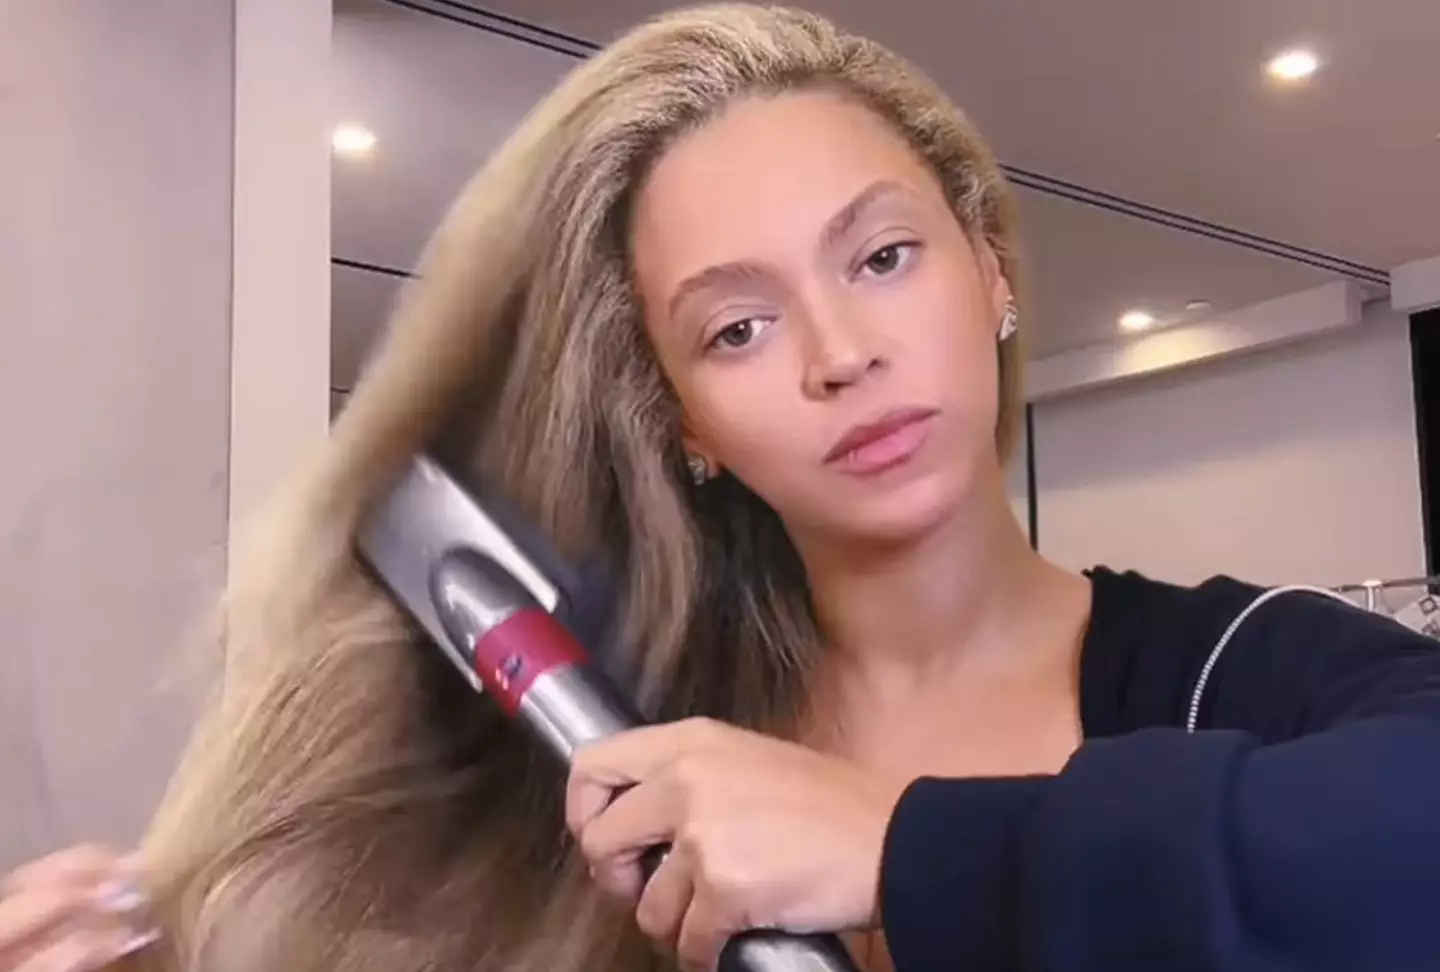 Beyoncé gave fans a glimpse into her haircare routine. (Instagram/@beyonce)